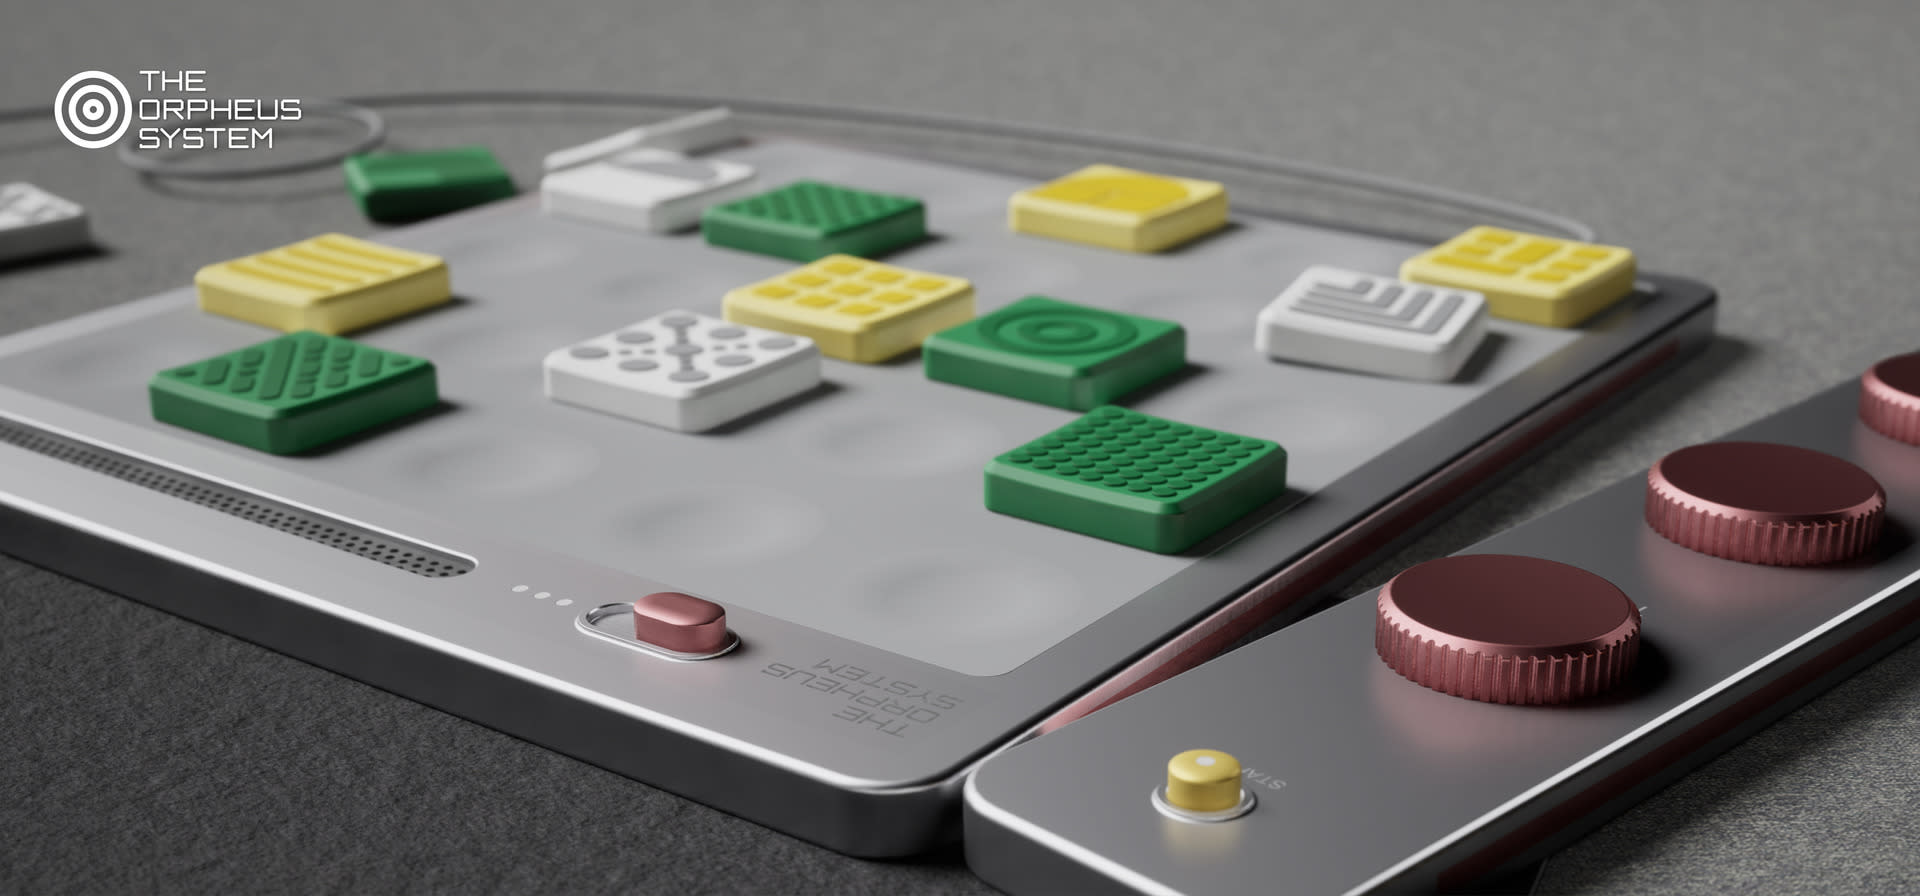 An extreme close up of the 3D render of The Orpheus System gamboard, showing the tiles and sound control bar.